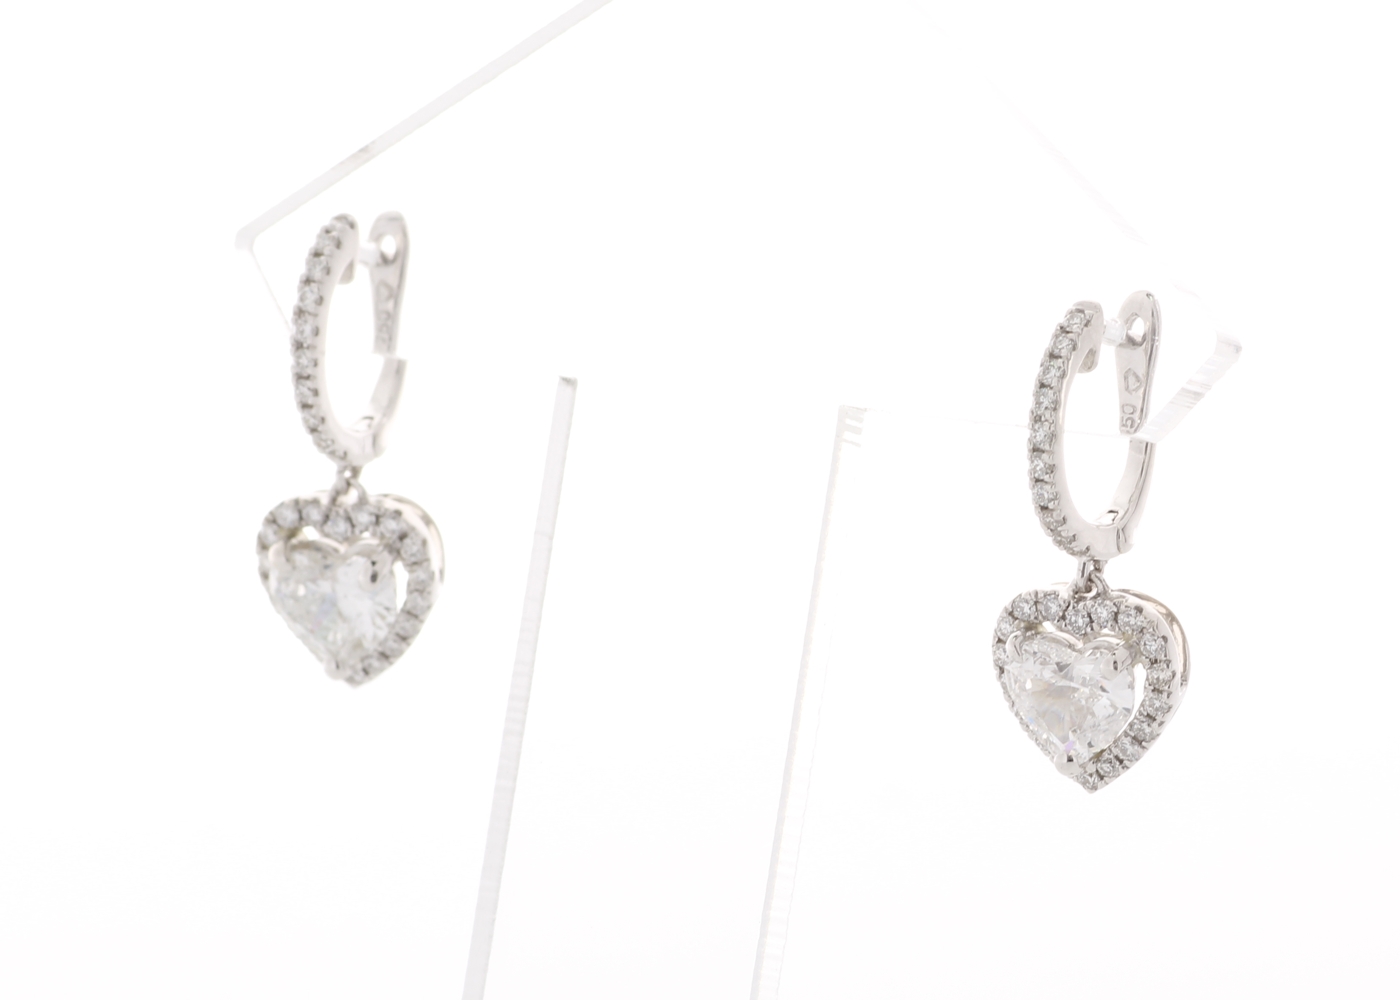 18ct White Gold Heart Shape Halo Drop Earring 1.74 Carats - Image 2 of 4